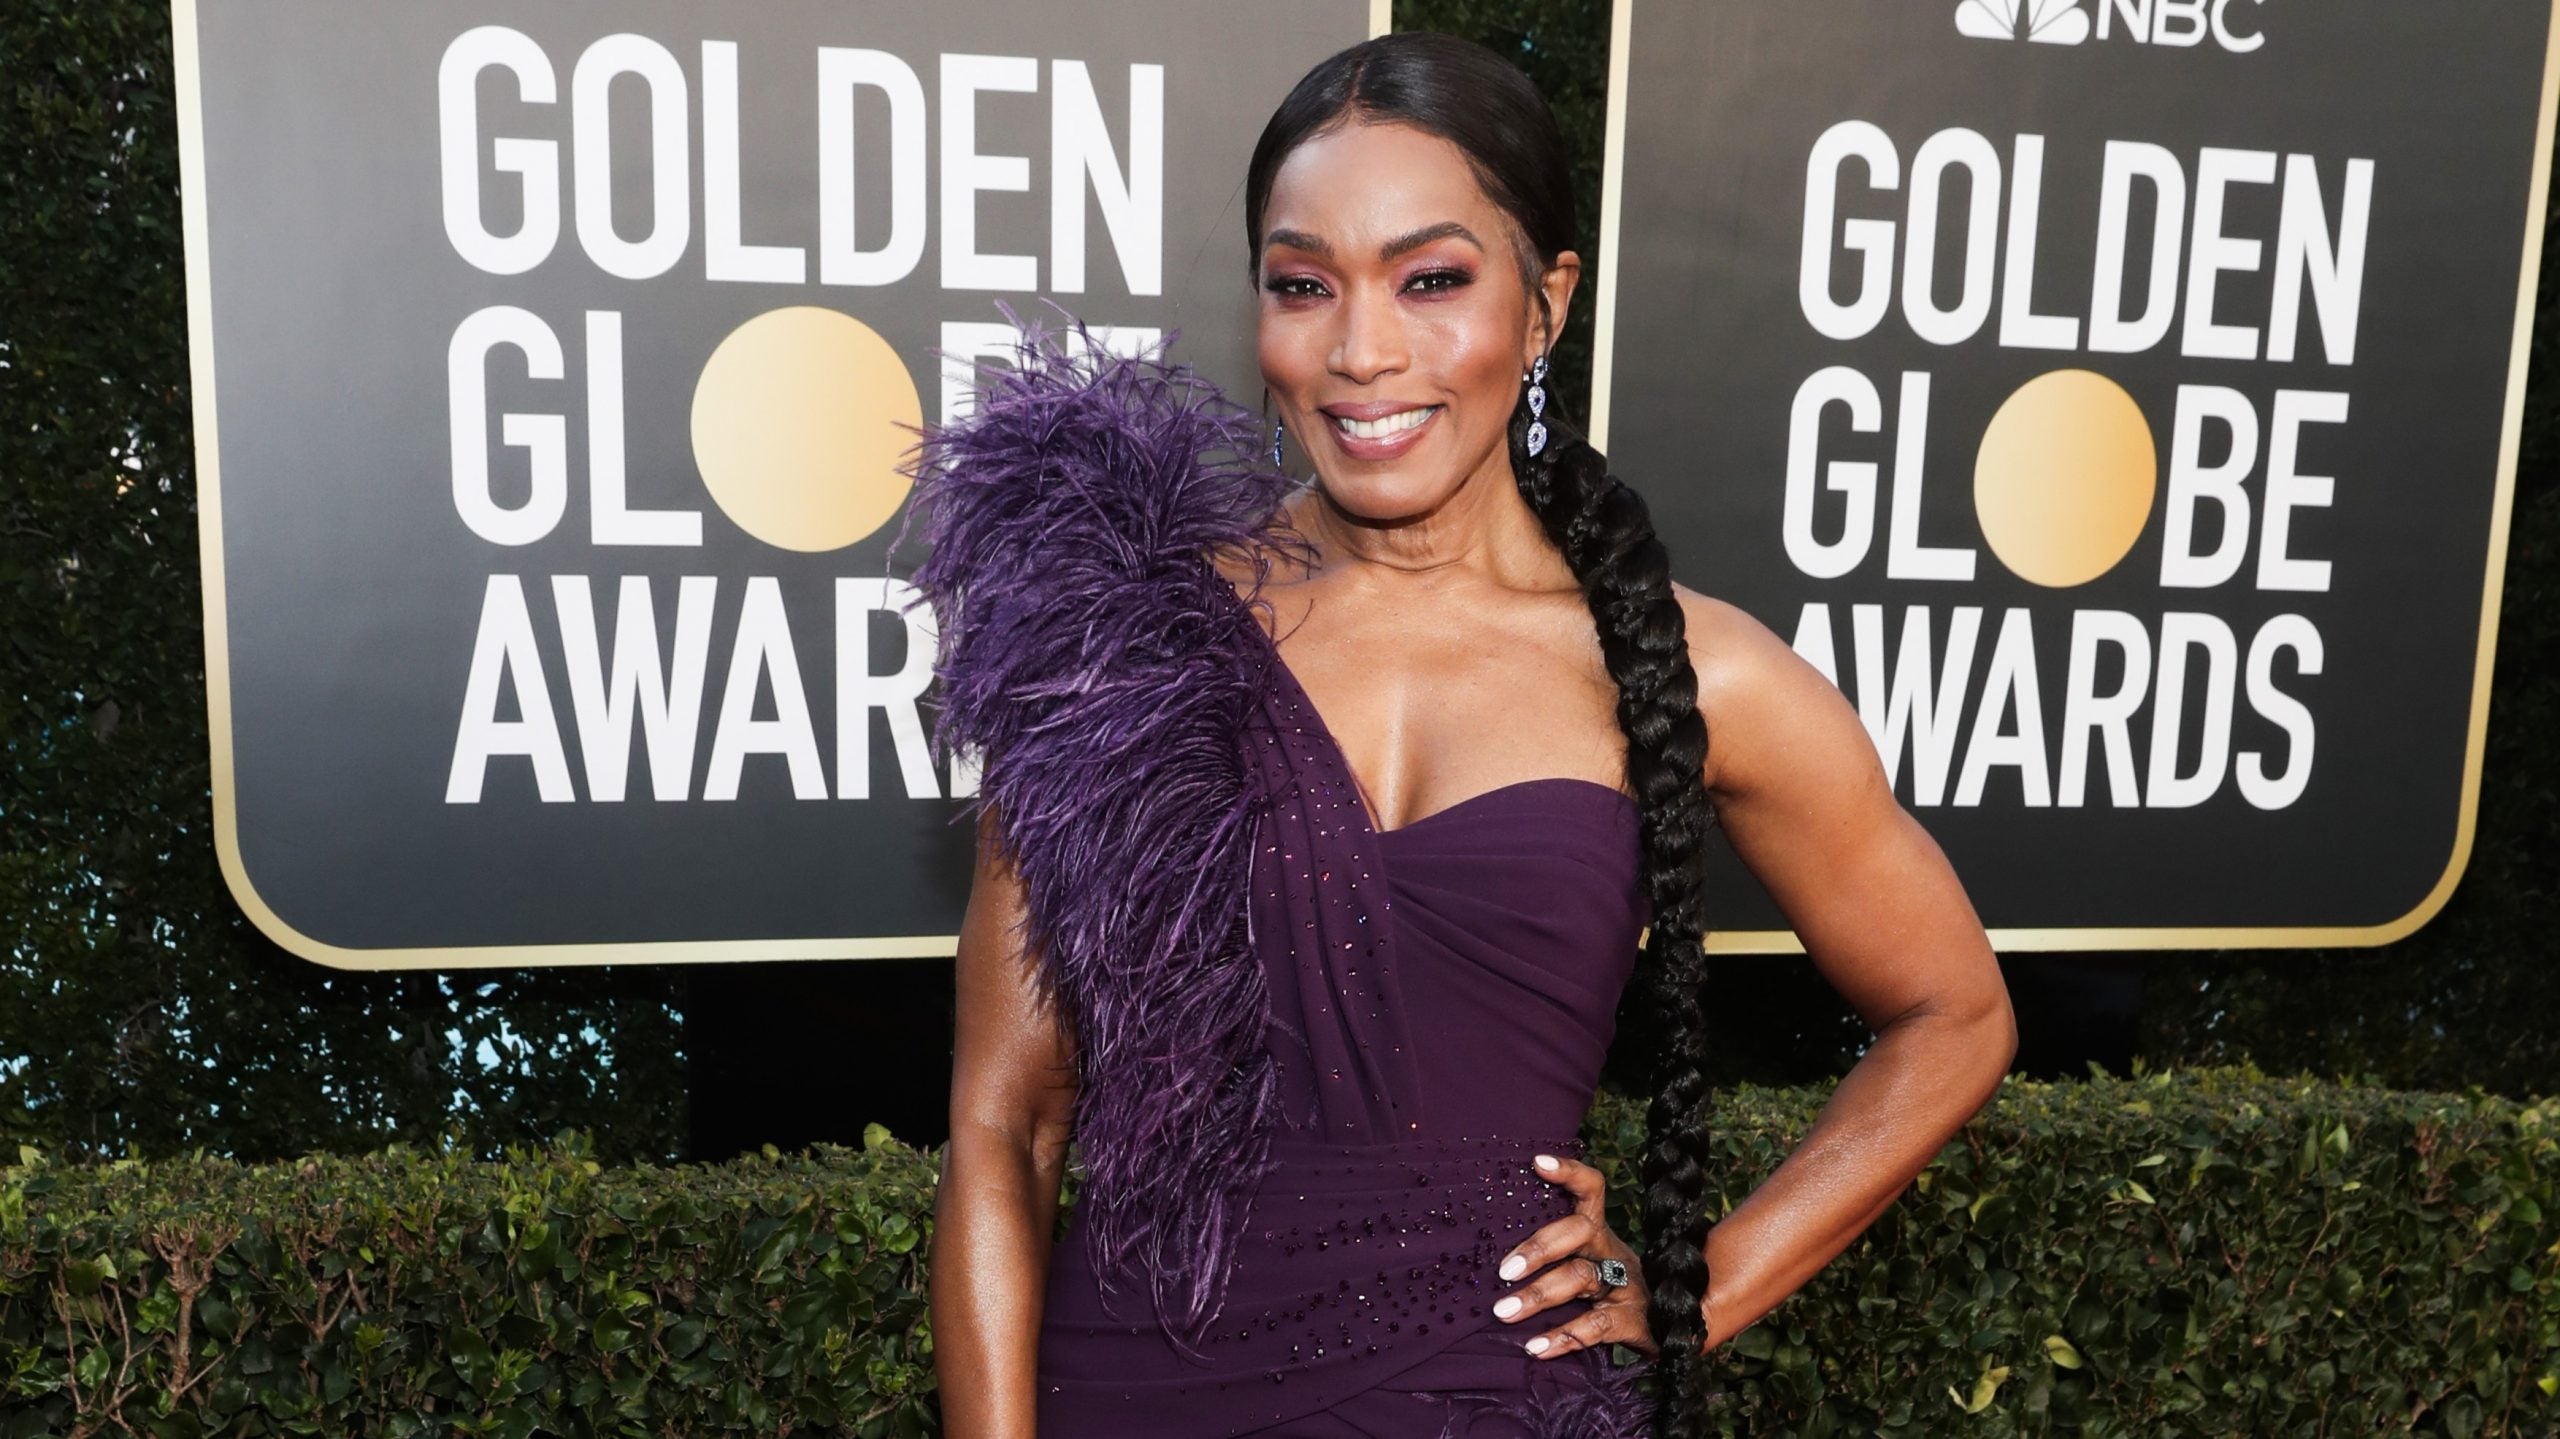 Let’s Talk About Angela Bassett’s Braid At The  Golden Globes Awards